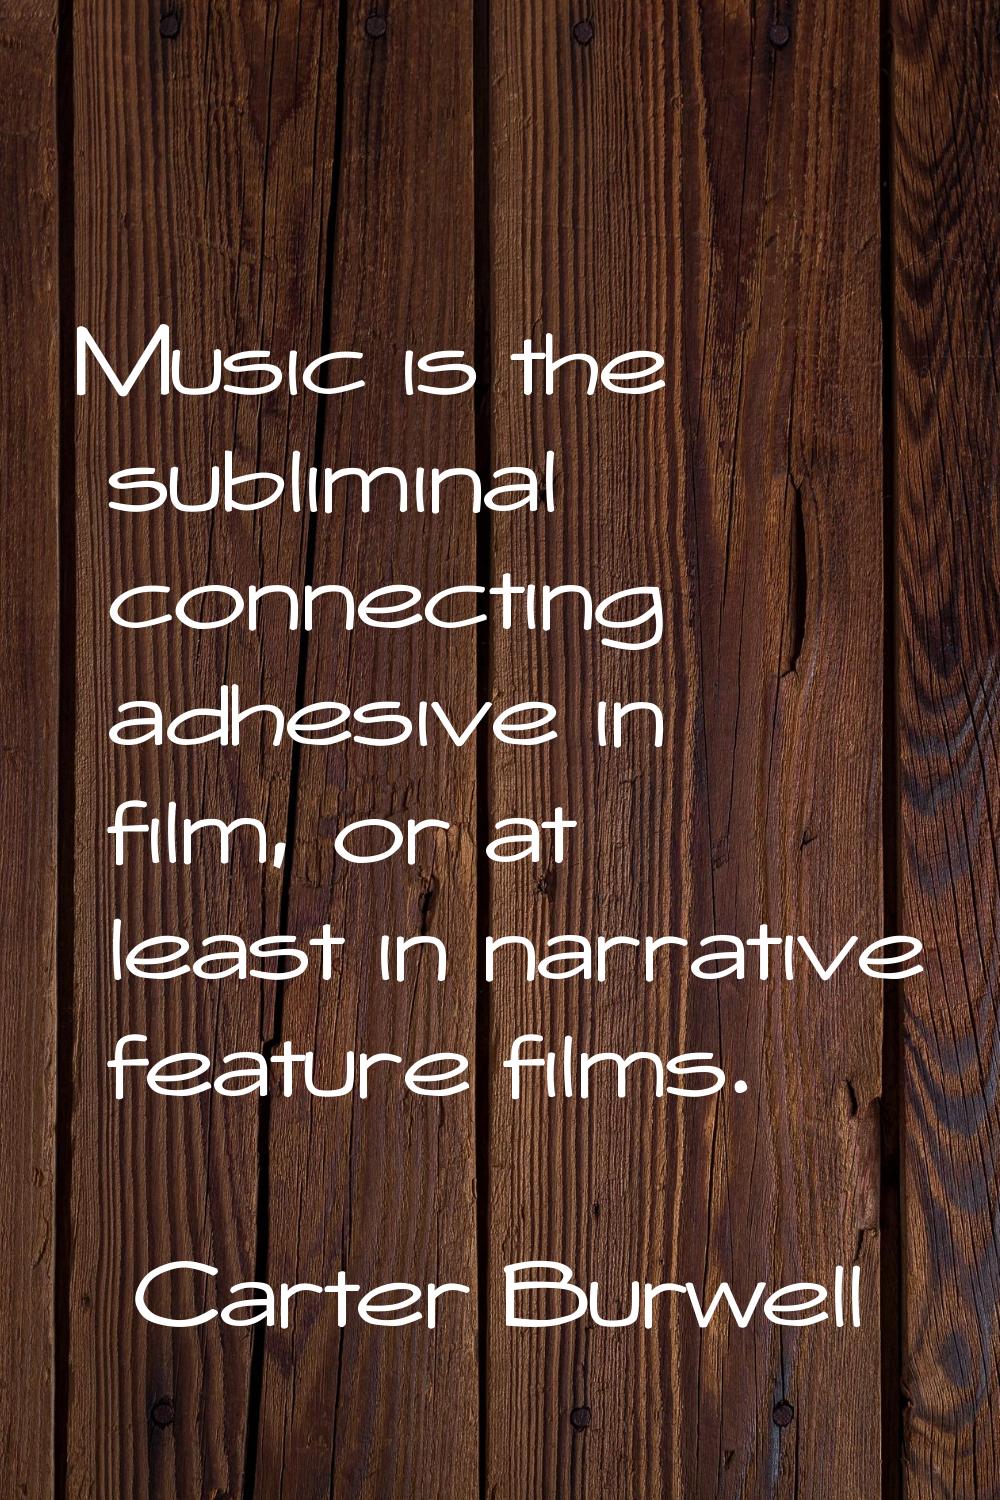 Music is the subliminal connecting adhesive in film, or at least in narrative feature films.